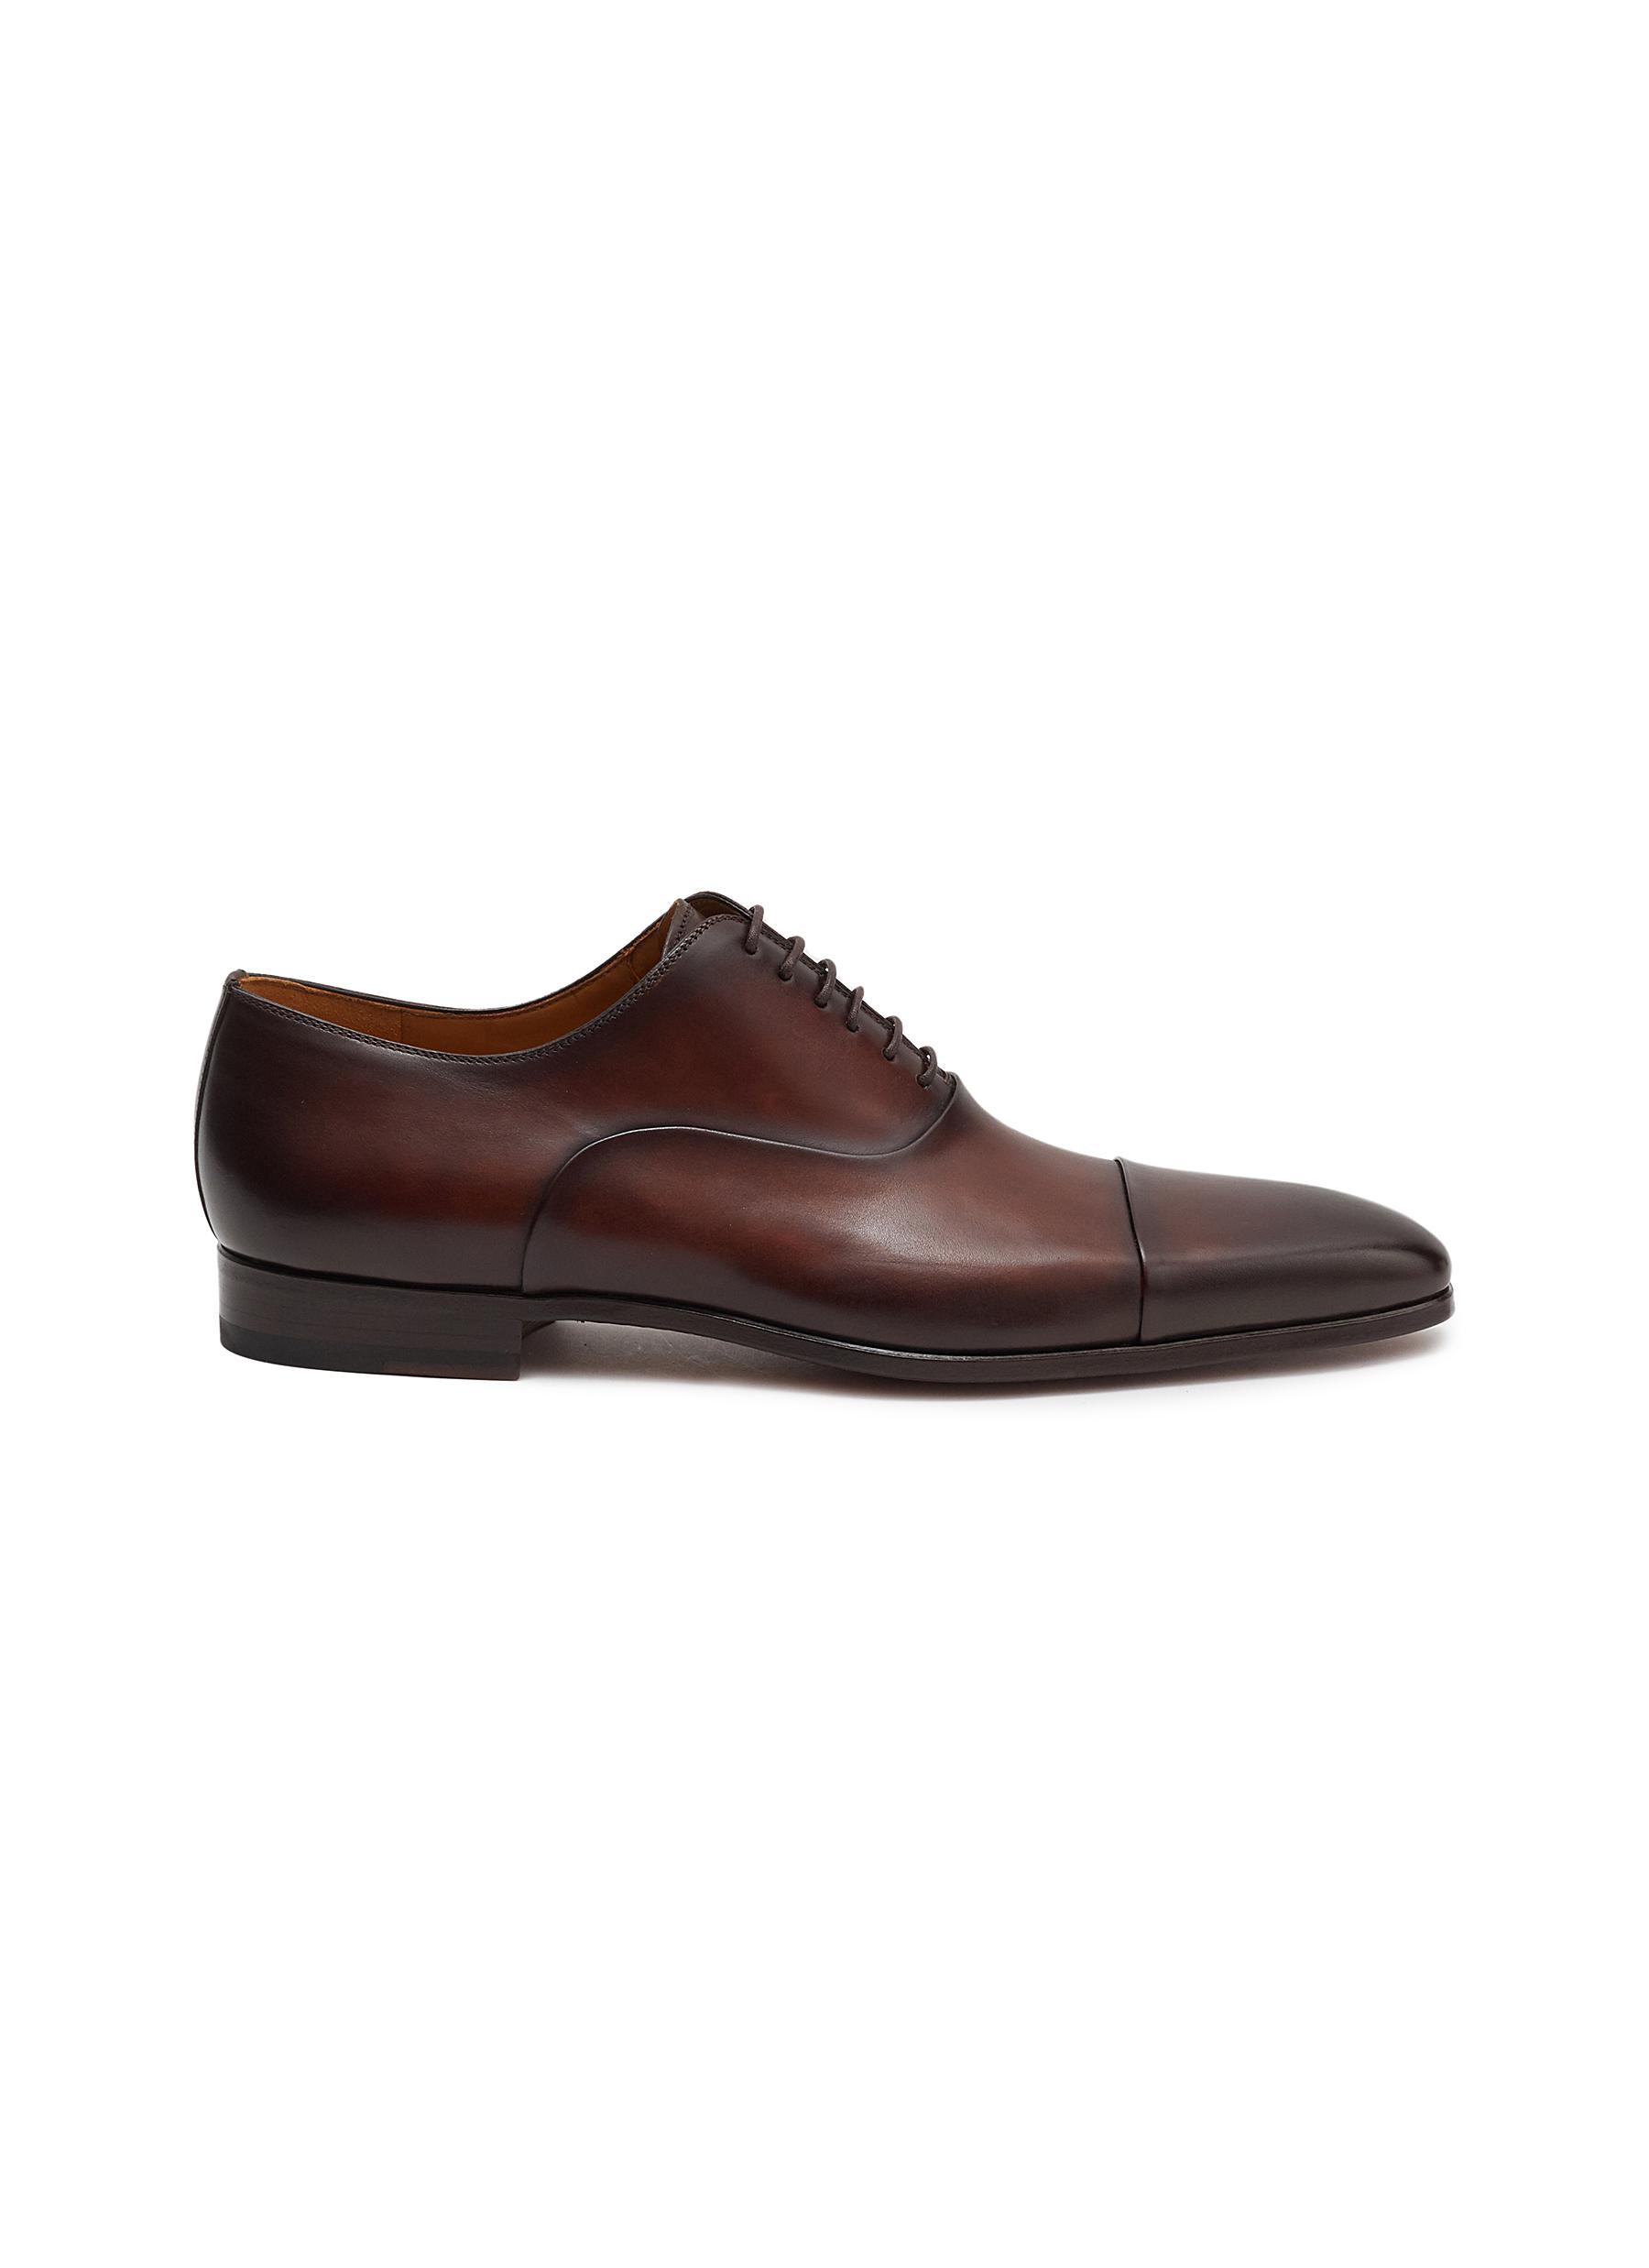 MAGNANNI Cap Toe 6-Eyelet Leather Oxford Shoes